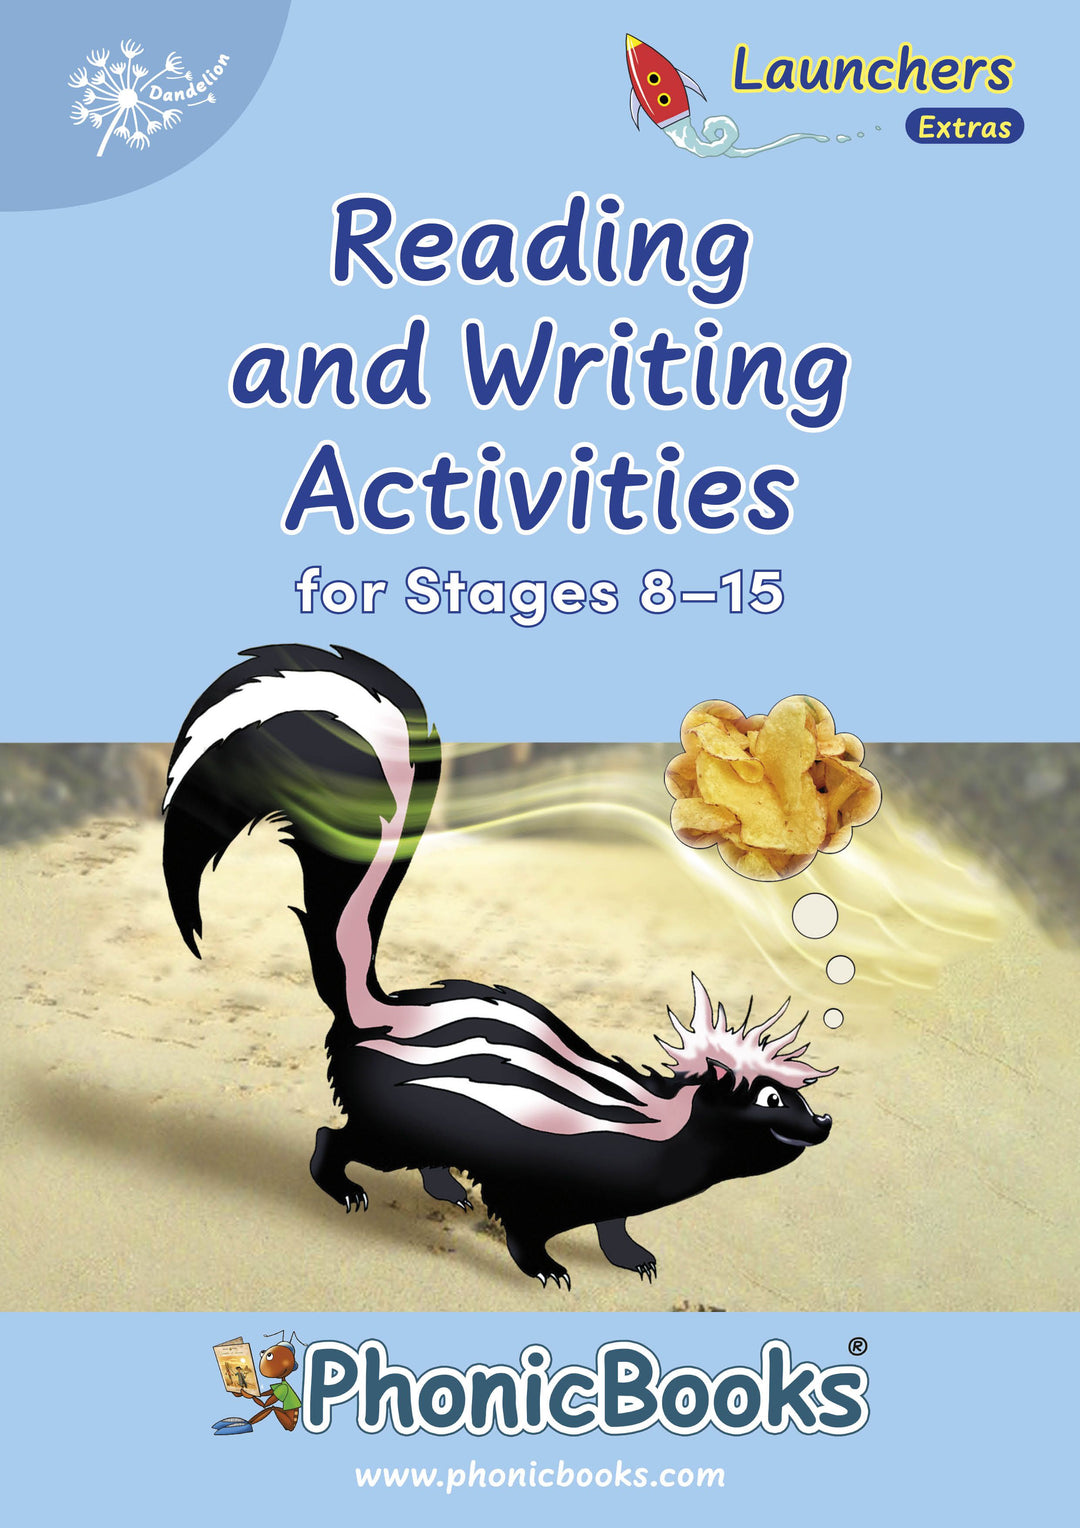 Dandelion Launchers Extras Stages 8-15 Reading and Writing Activities (EXTRAS)